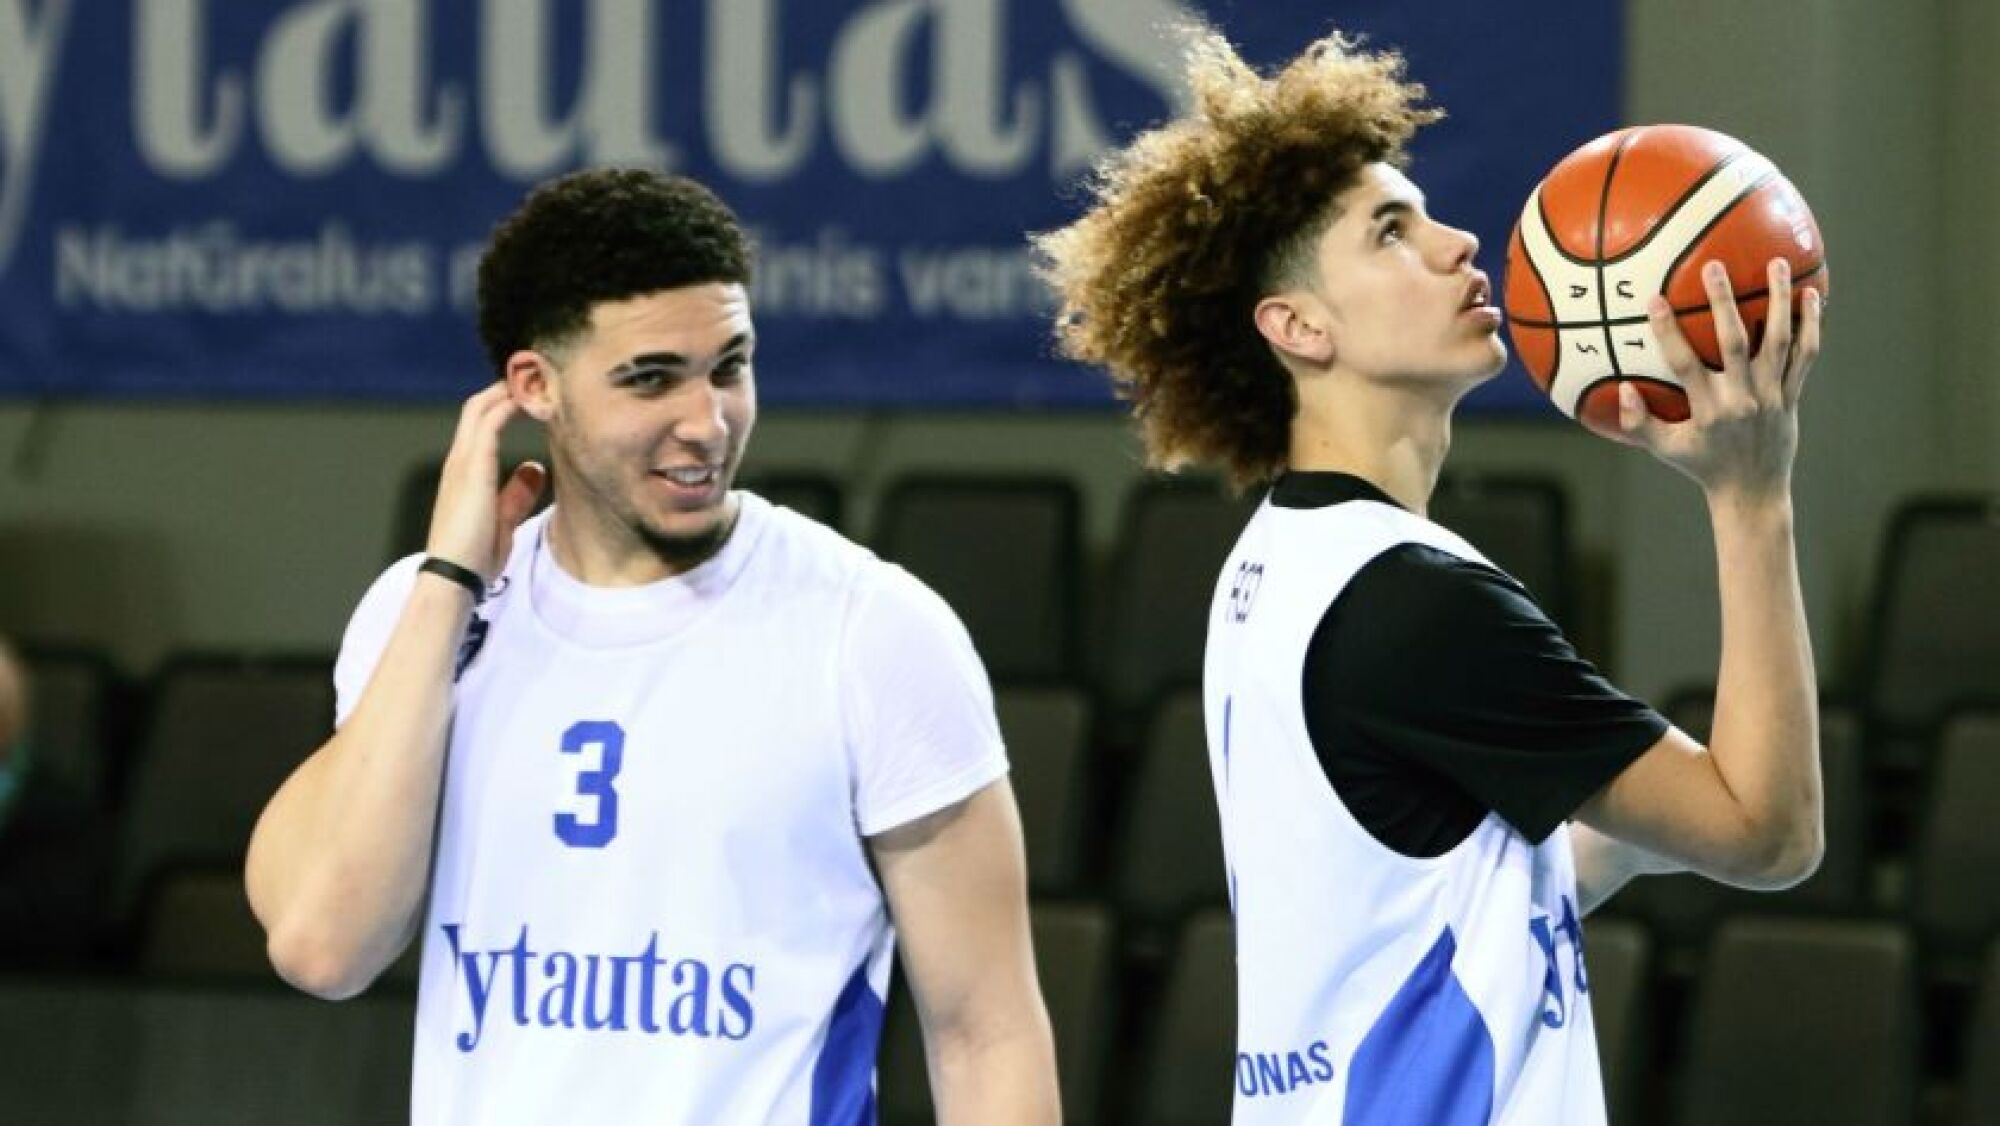 LiAngelo Ball (3) and LaMelo Ball take part in their first training session for Vytautas Prienai on Jan. 5 in Lithuania.